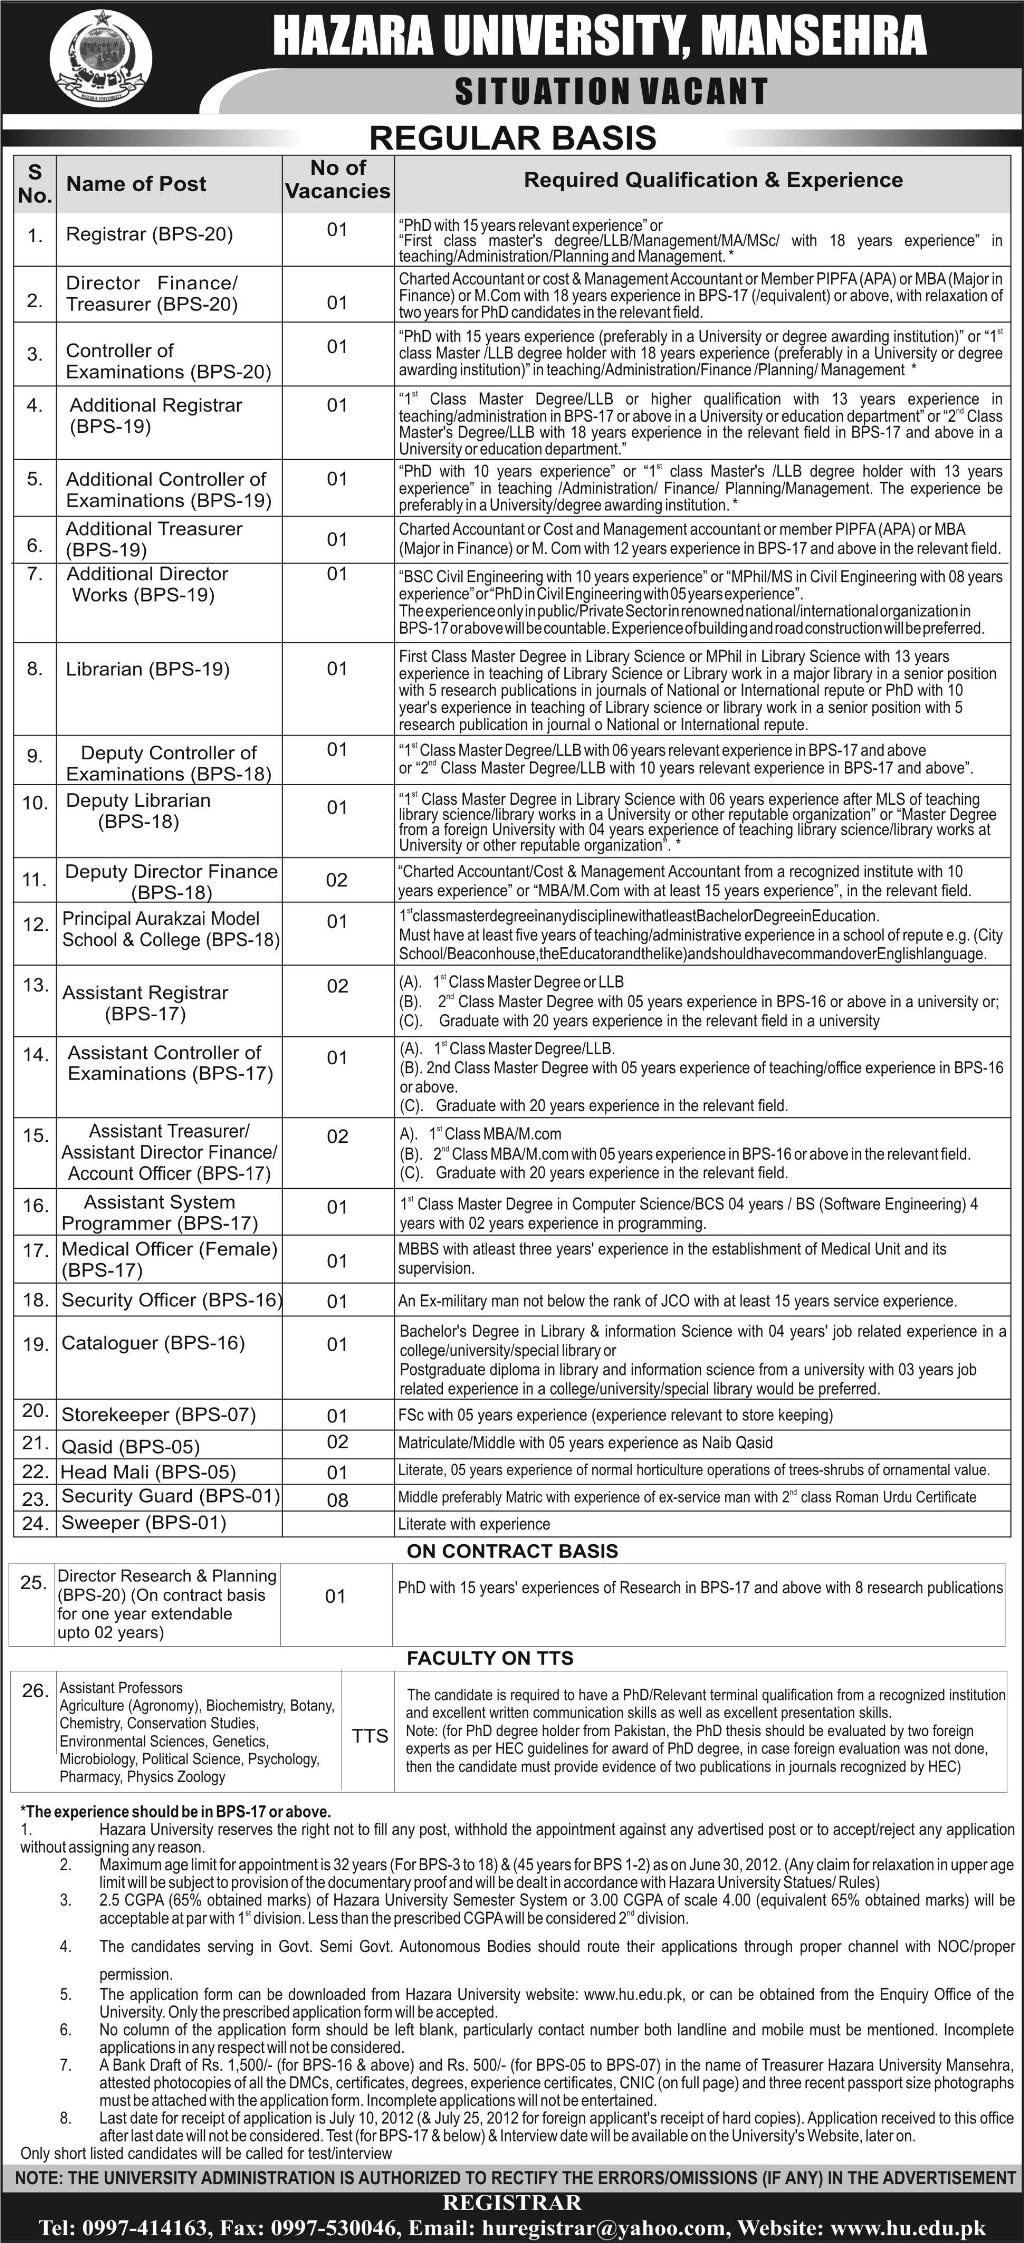 Teaching Faculty, Administrative and Support Staff Required at HAZARA UNIVERSITY